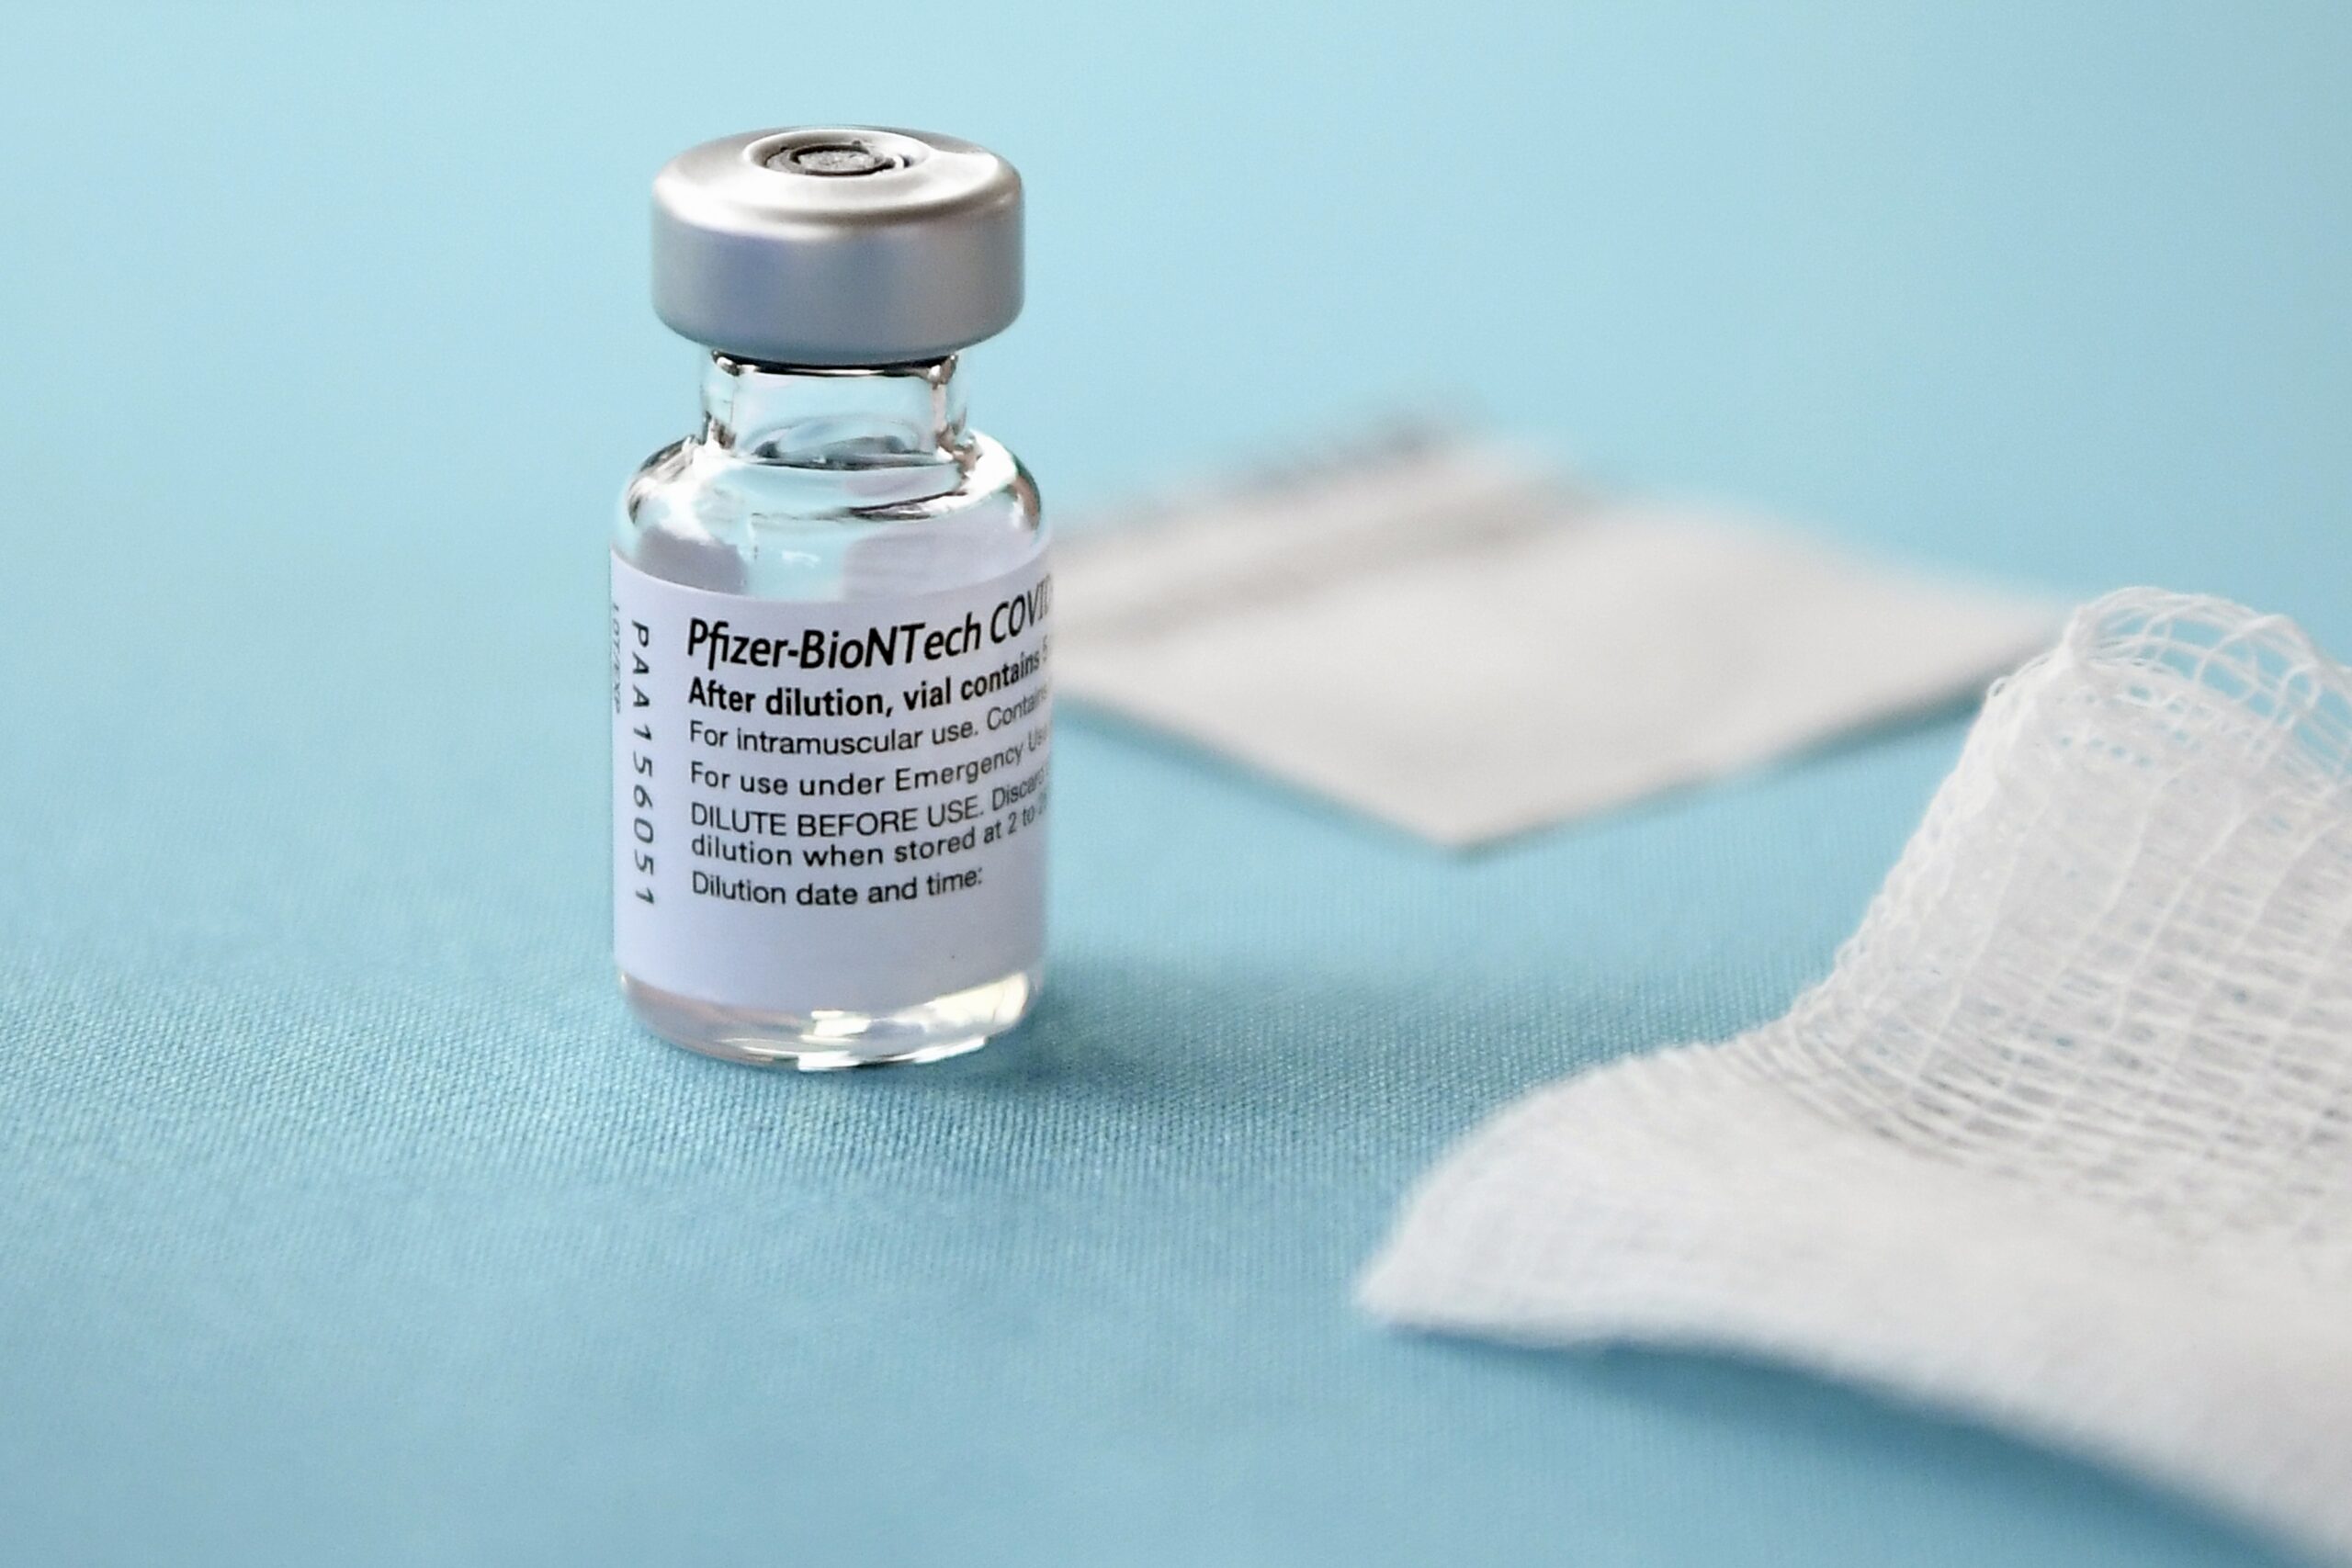 A vial of the Pfizer-BioNTech vaccine for COVID-19